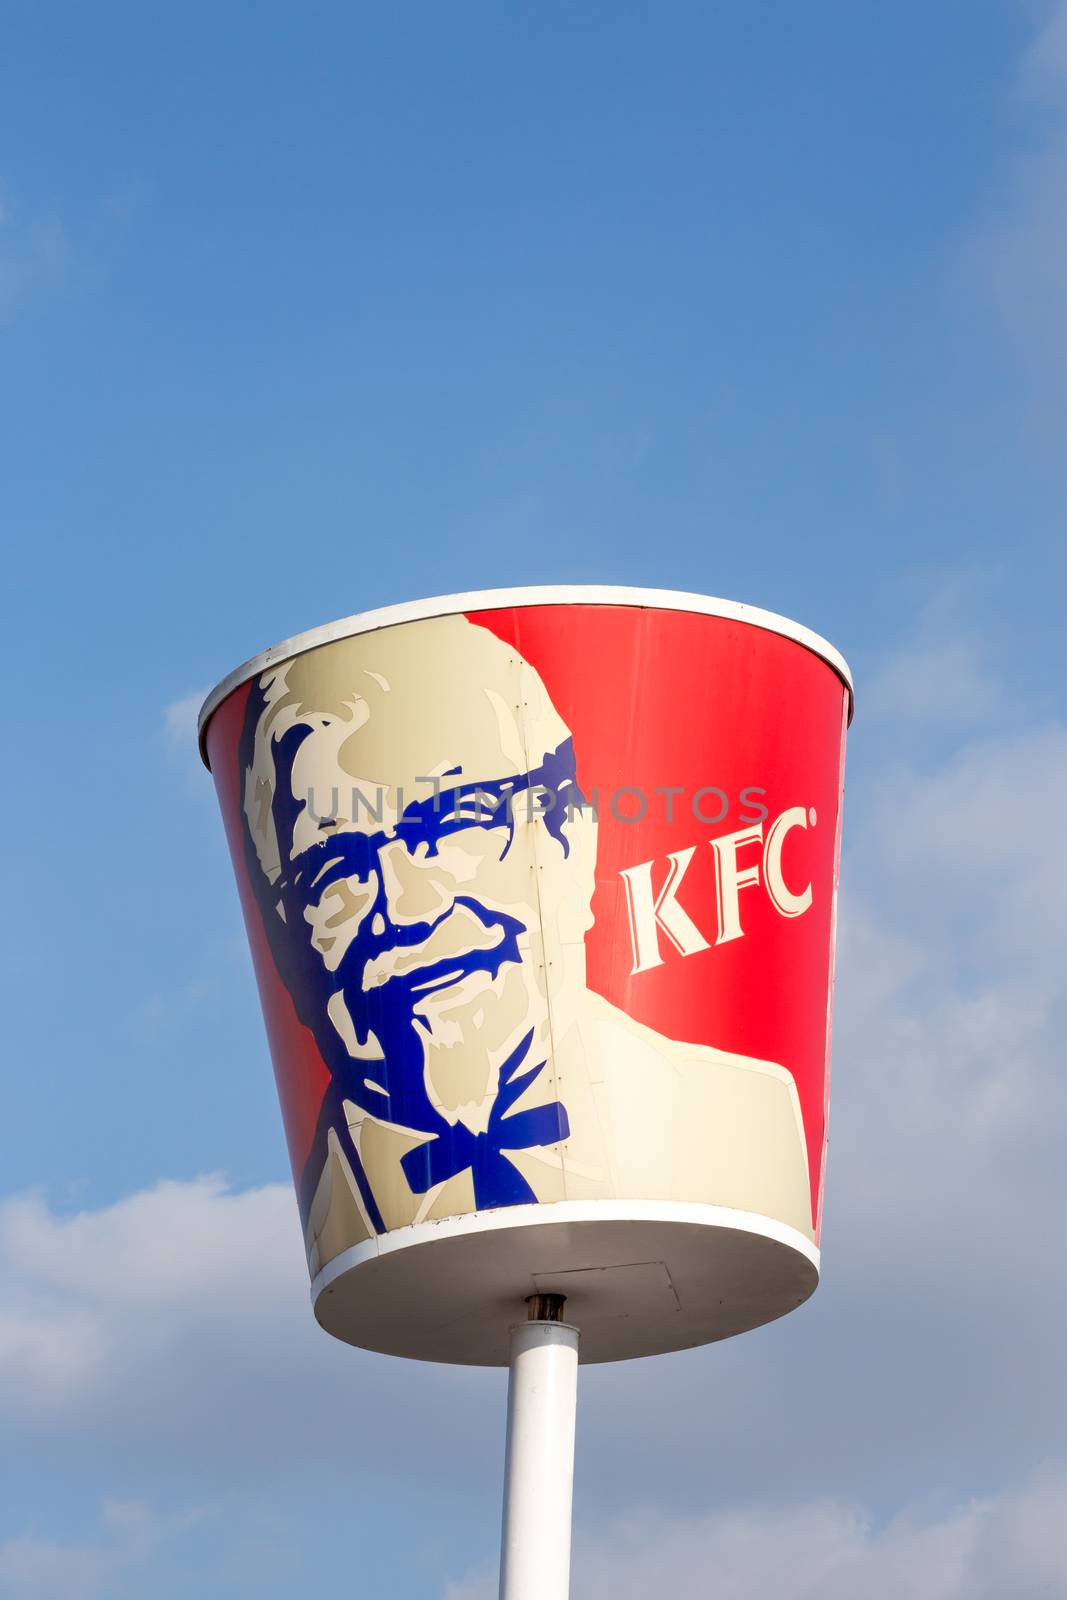 LOS ANGELES, CA/USA - NOVEMBER 16, 2014: Traditional KFC restaurant sign. KFC is a fast food restaurant chain that specializes in fried chicken and world's second largest restaurant chain.